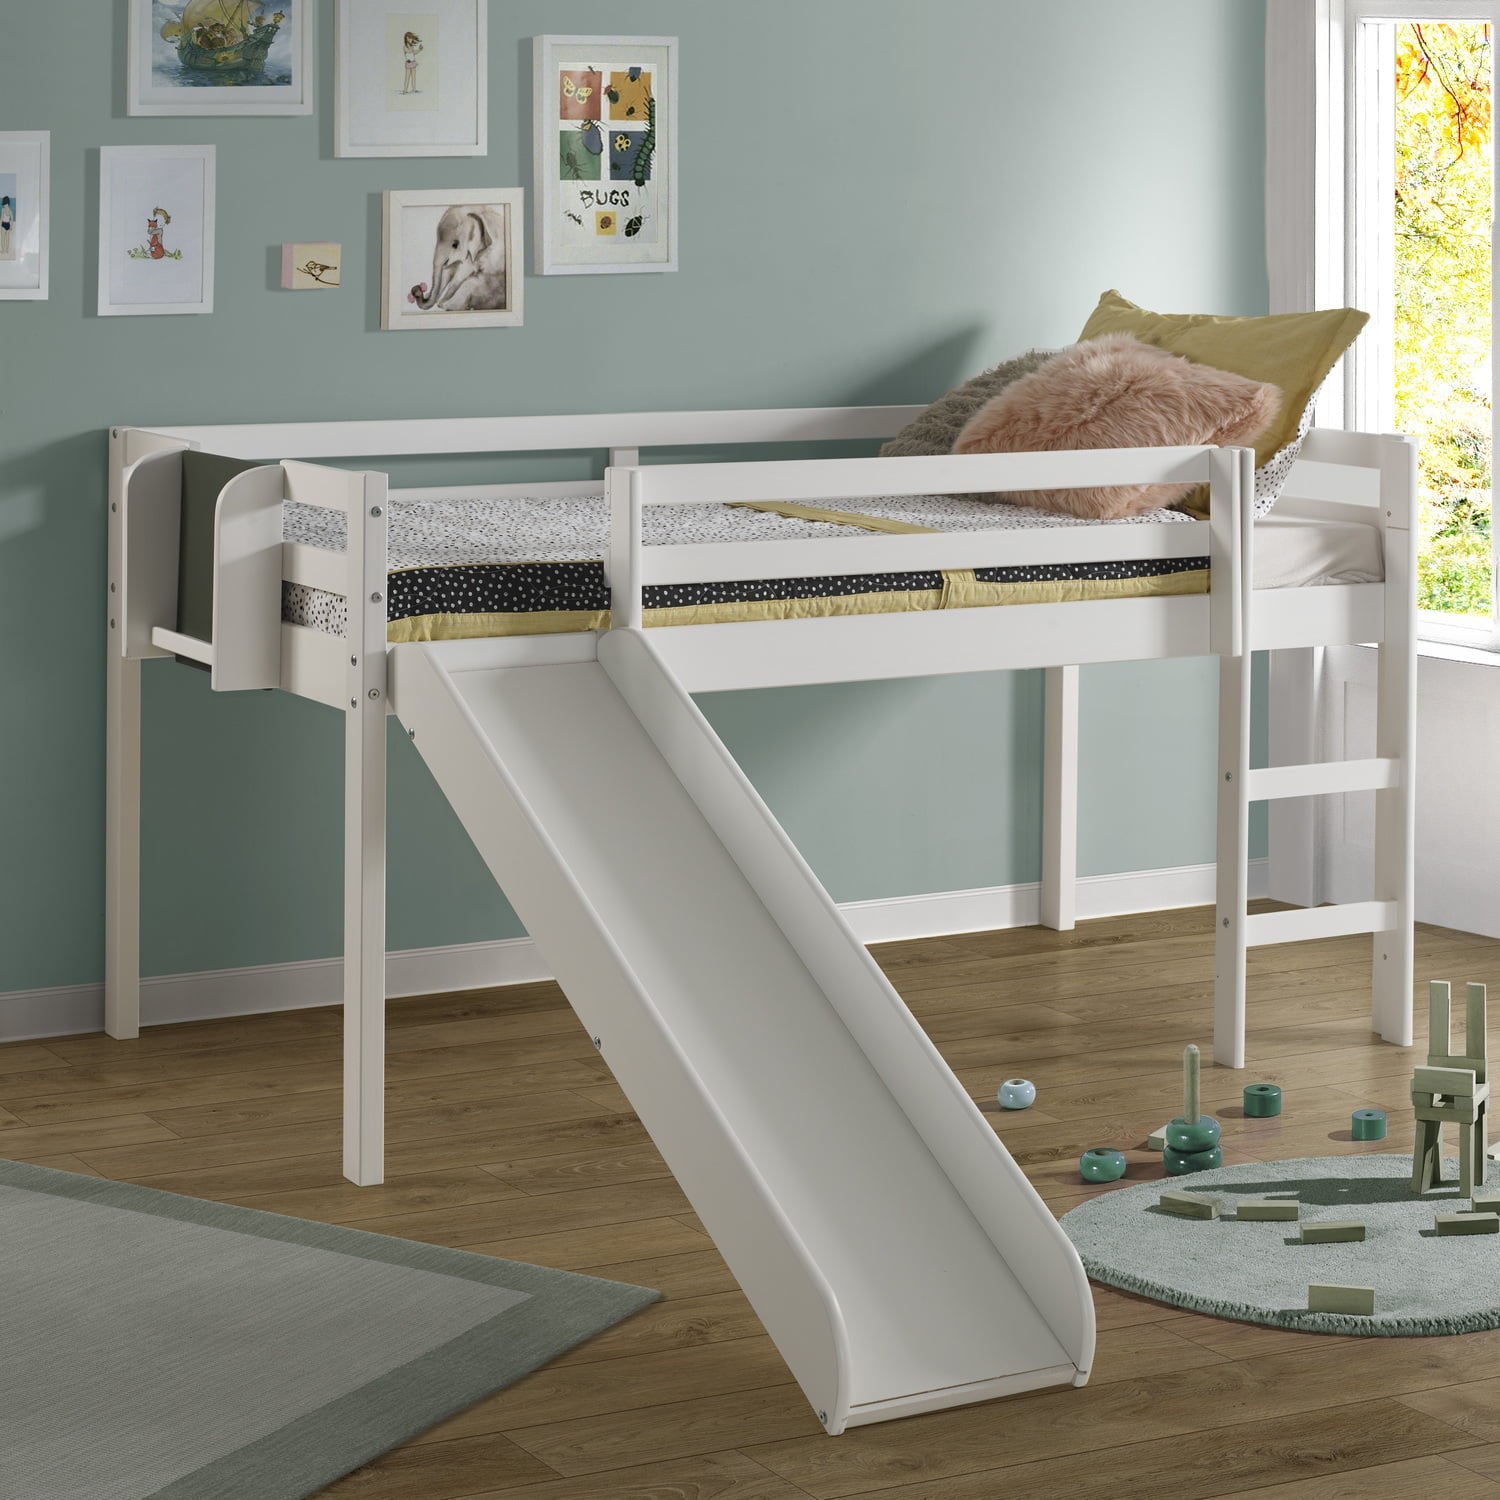 Naomi Home Cindy Kids Loft Bed with Slide, Twin Loft Bed with Slide, Loft Bed with Slide, Loft Bed Slide with Ladder, Chalkboard, Pine Wood Space Saving Kids Bed Frame for Boys, Girls, White